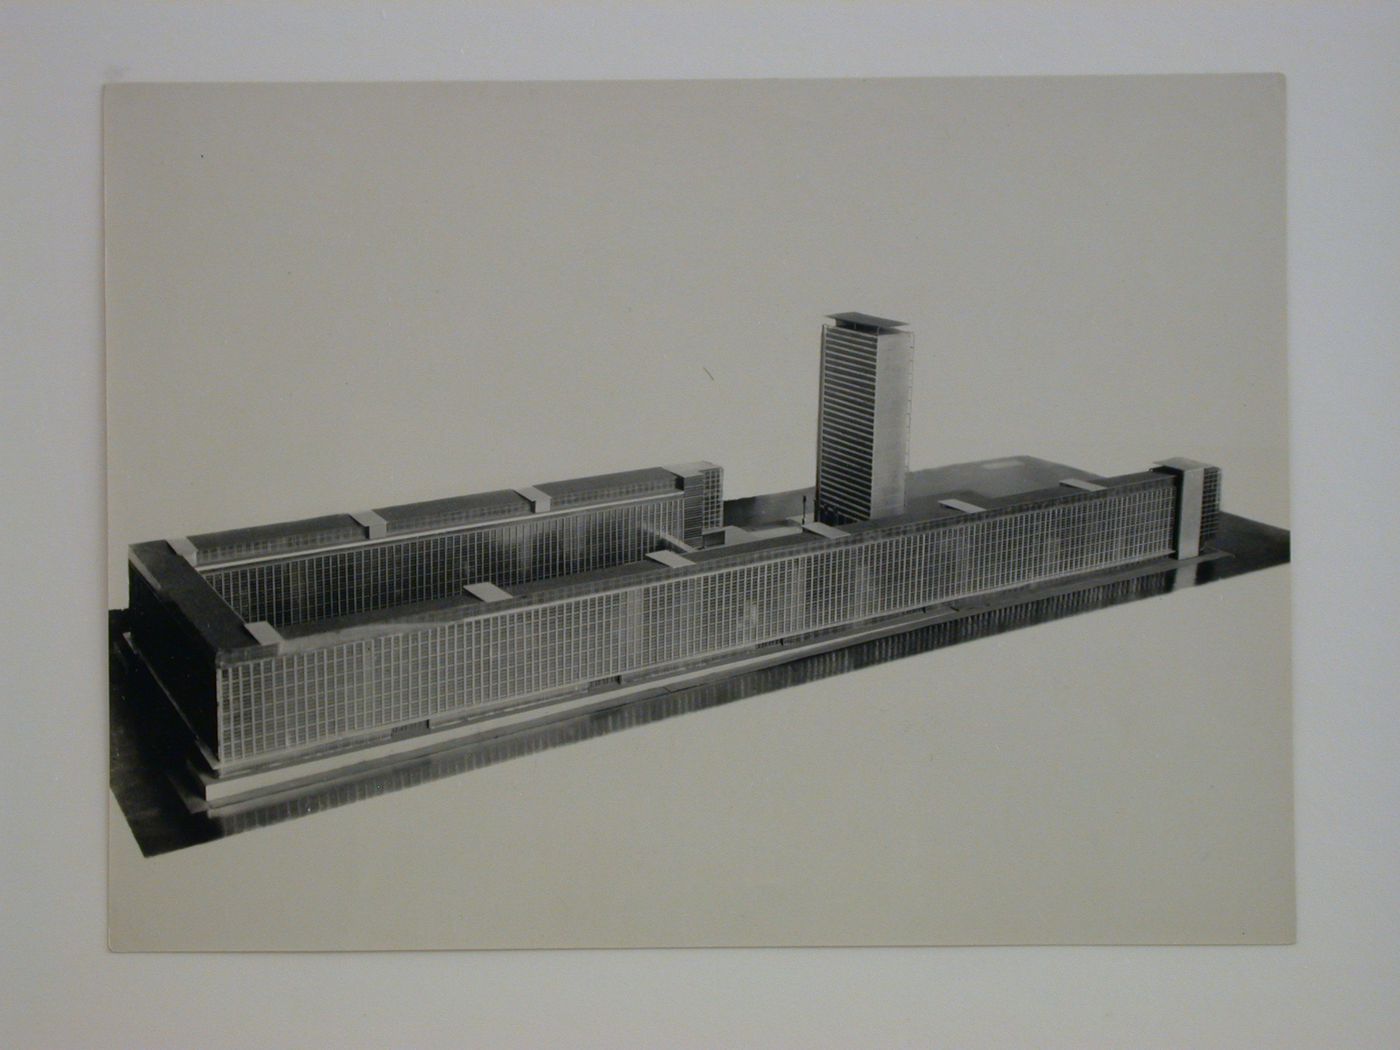 Photograph of a model for the Building of Industry, Sverdlovsk, Soviet Union (now Ekaterinburg, Russia)